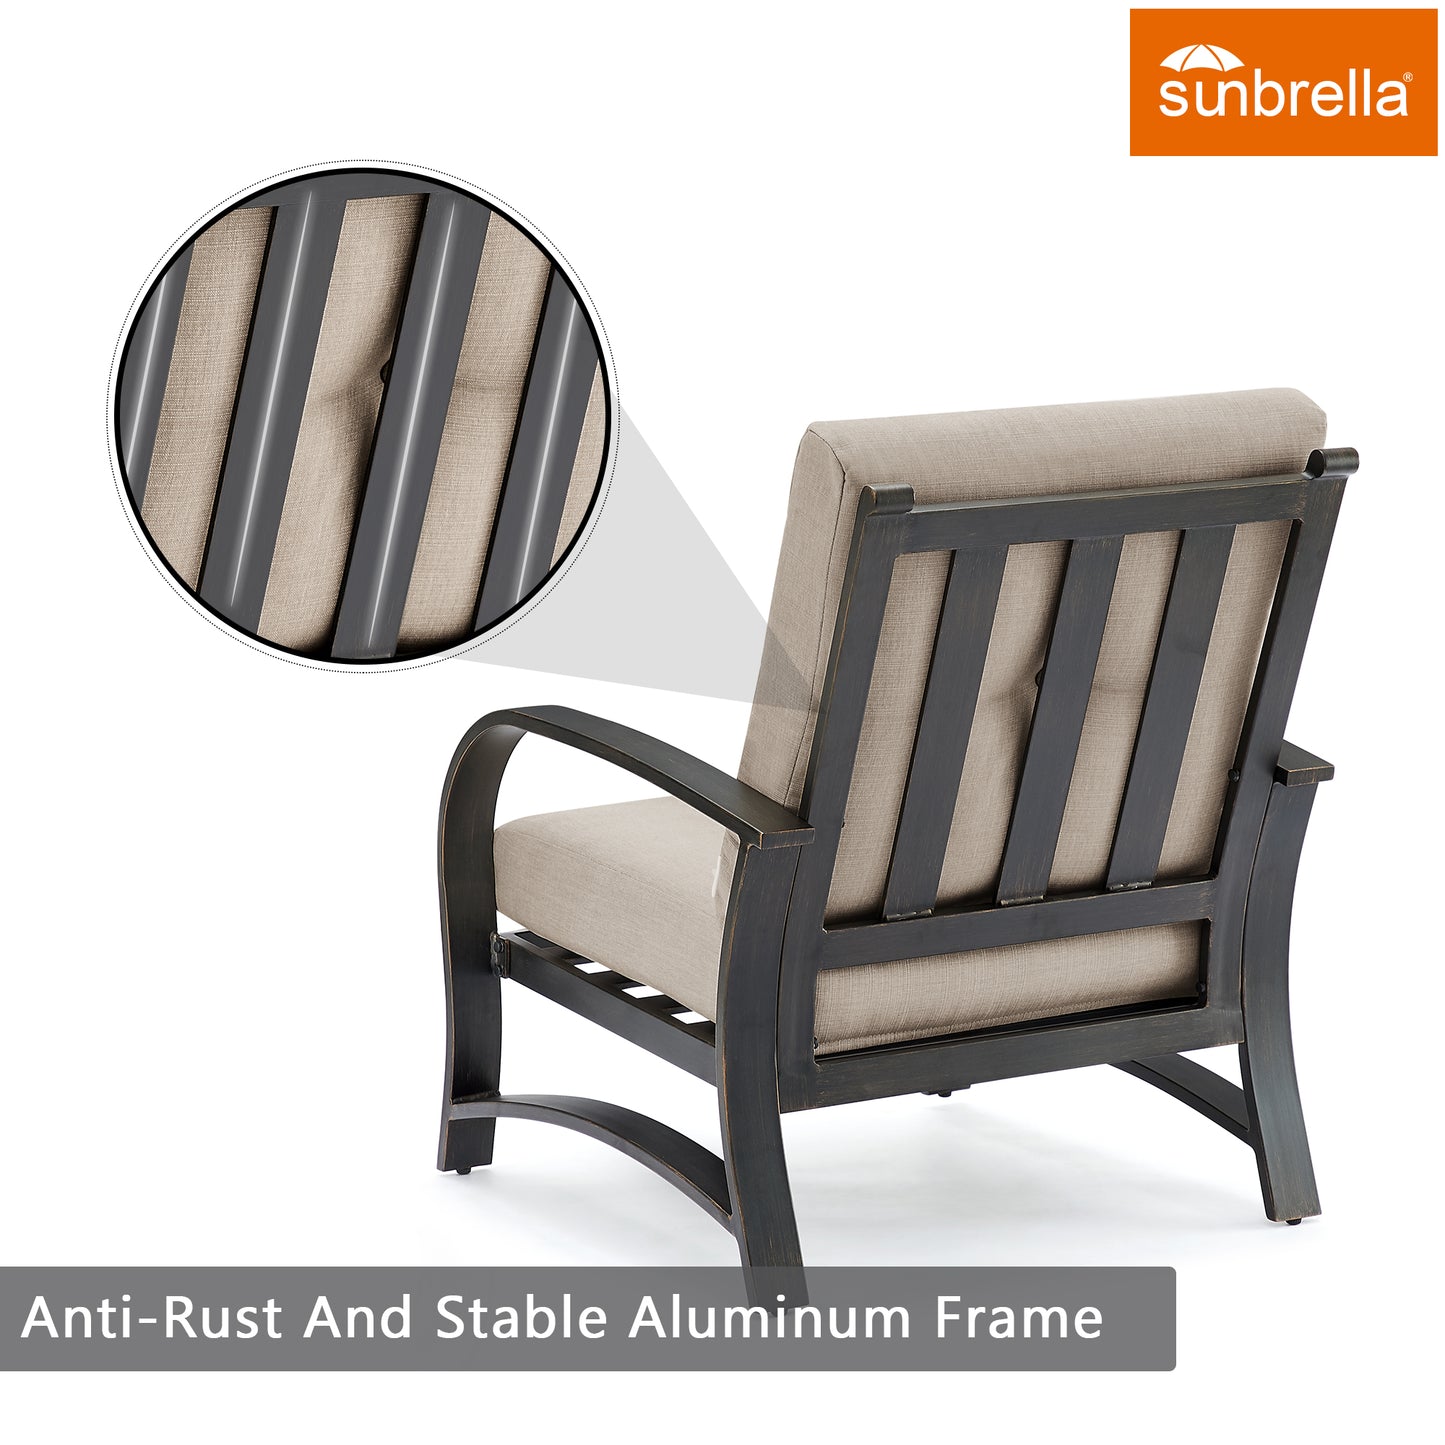 Patio Aluminum Club Chairs Indoor Outdoor Set of 2 Conversation Seating with Sunbrella Cushion Covers